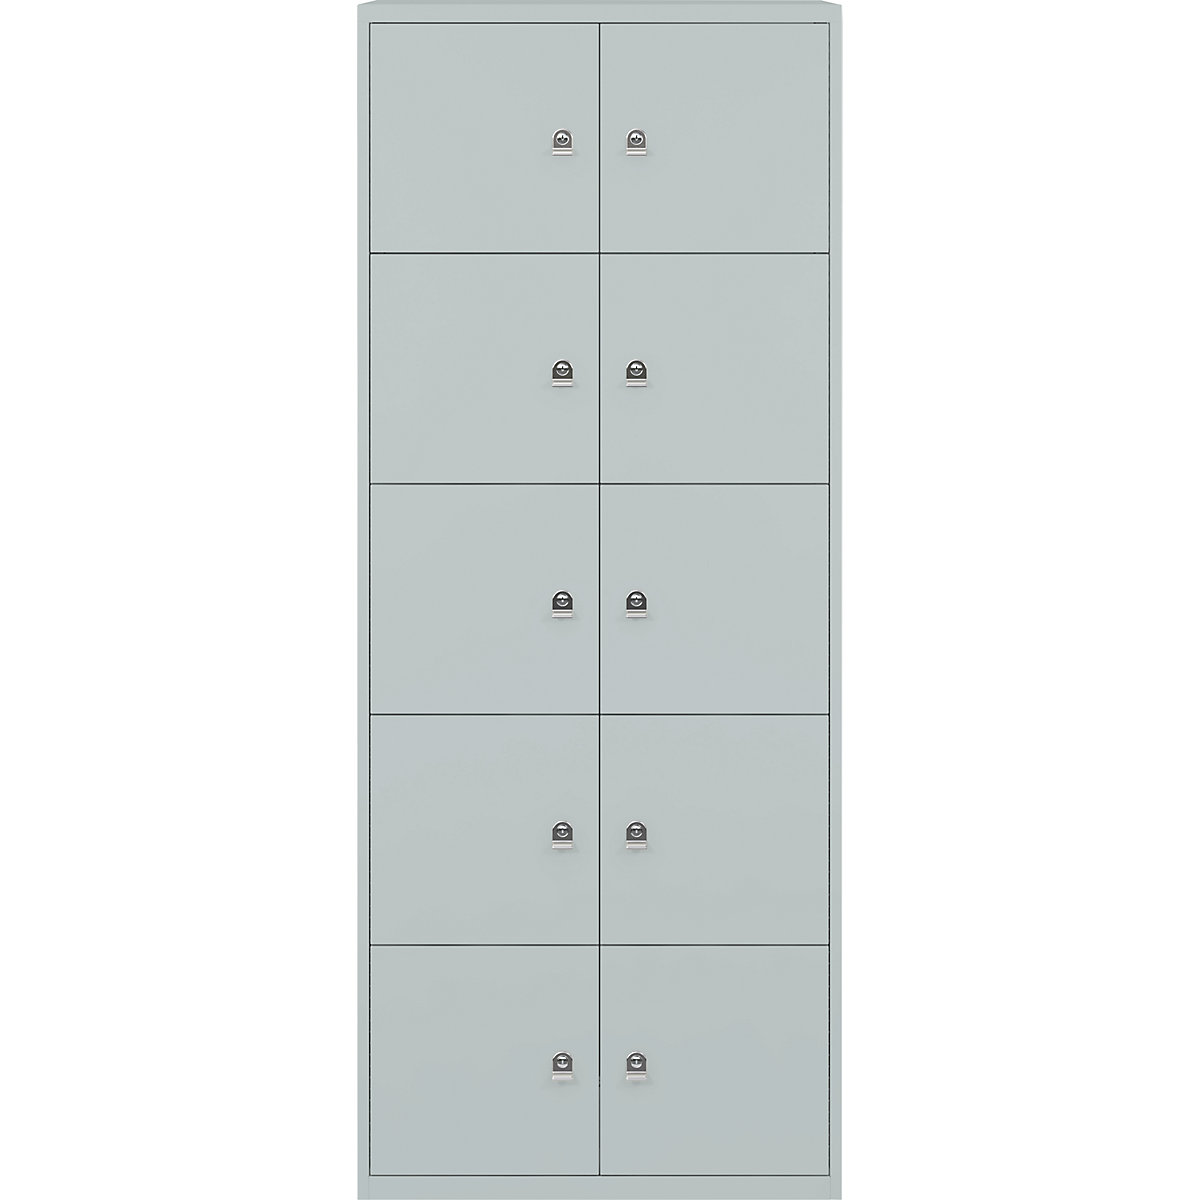 LateralFile™ lodge – BISLEY, with 10 lockable compartments, height 375 mm each, silver